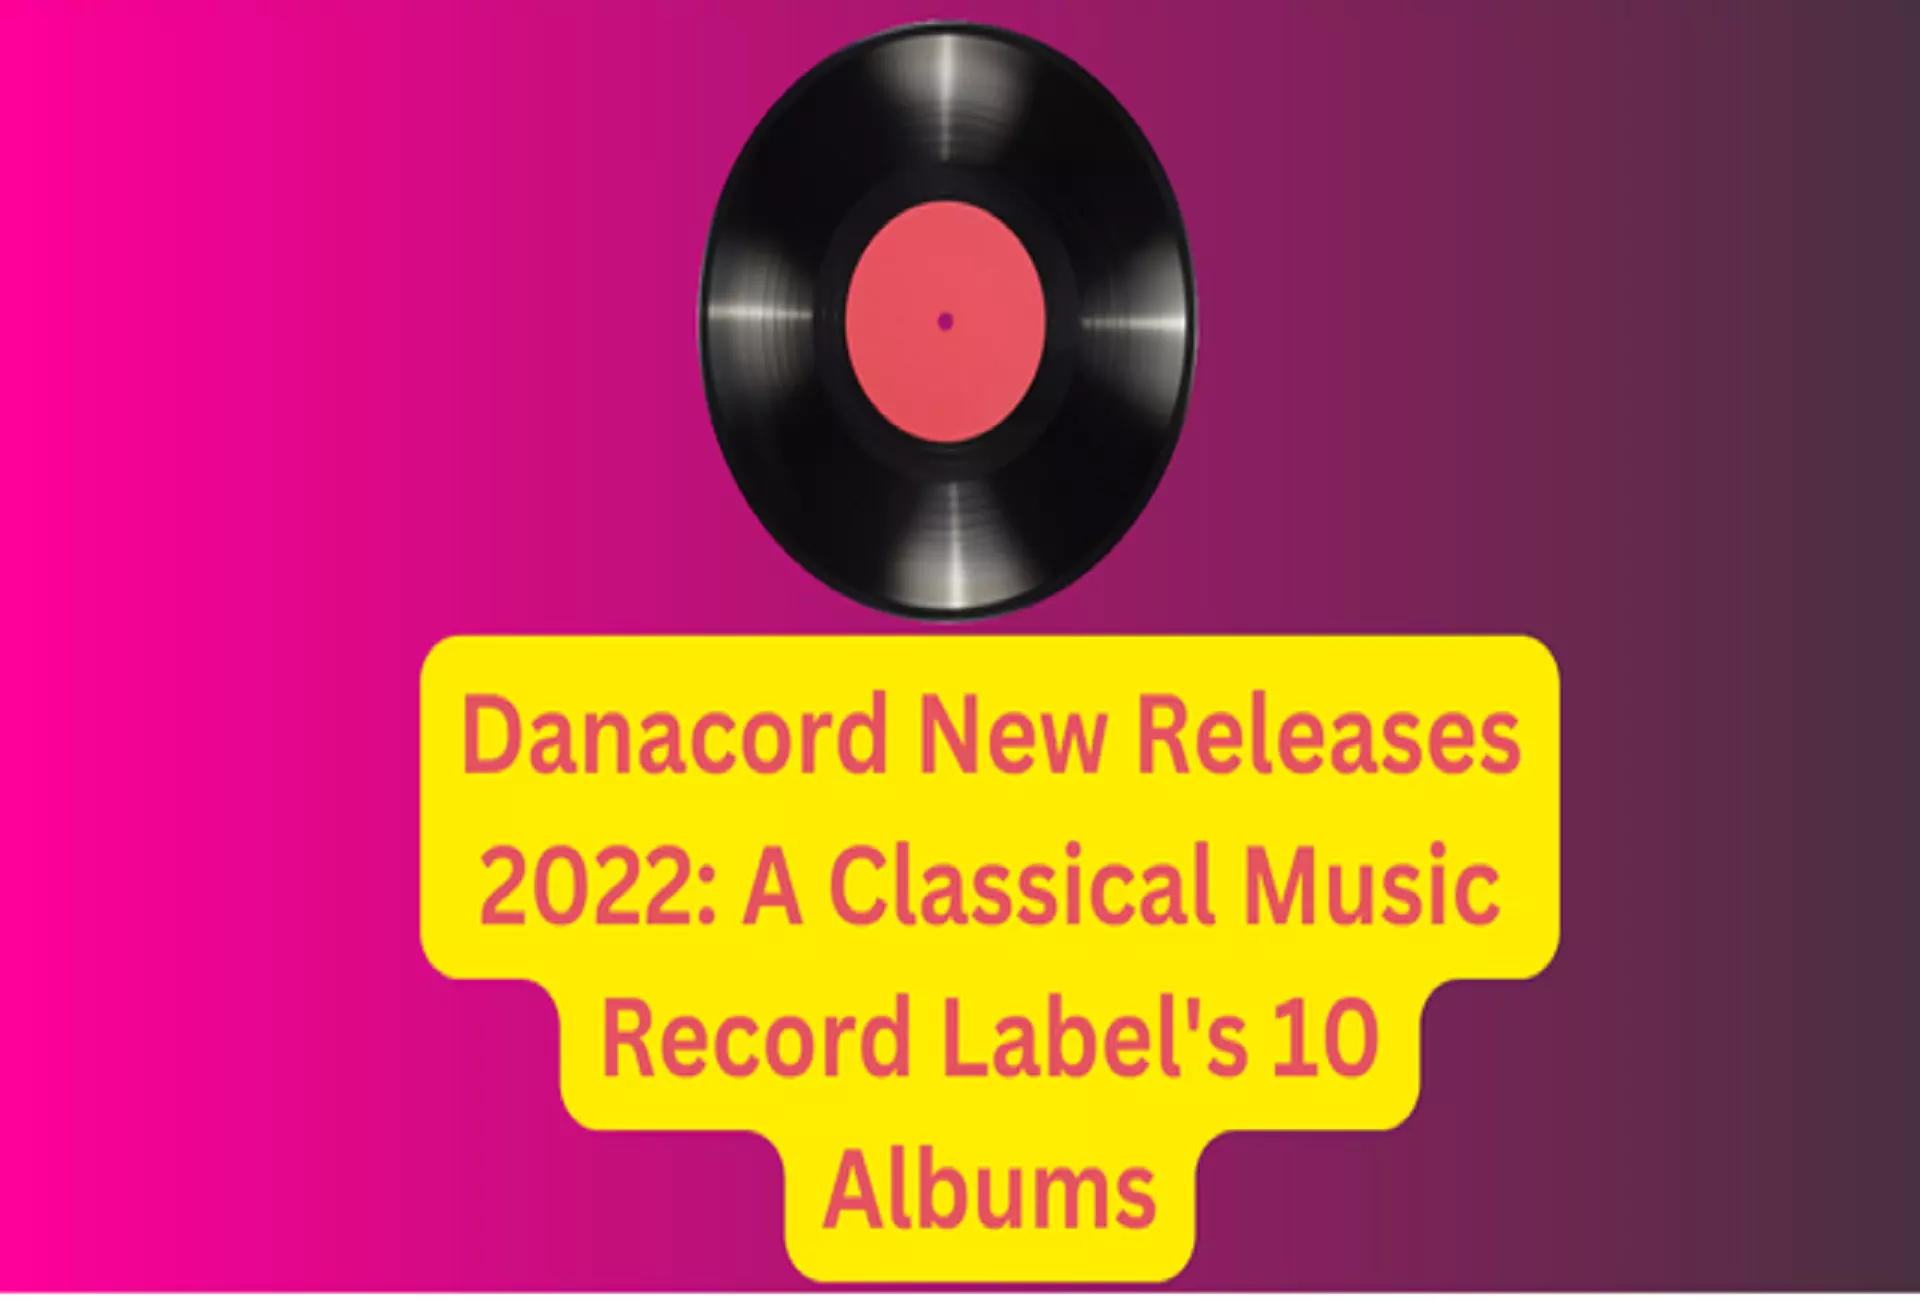 Danacord New Releases 2022: A Classical Music Record Label’s 10 Albums